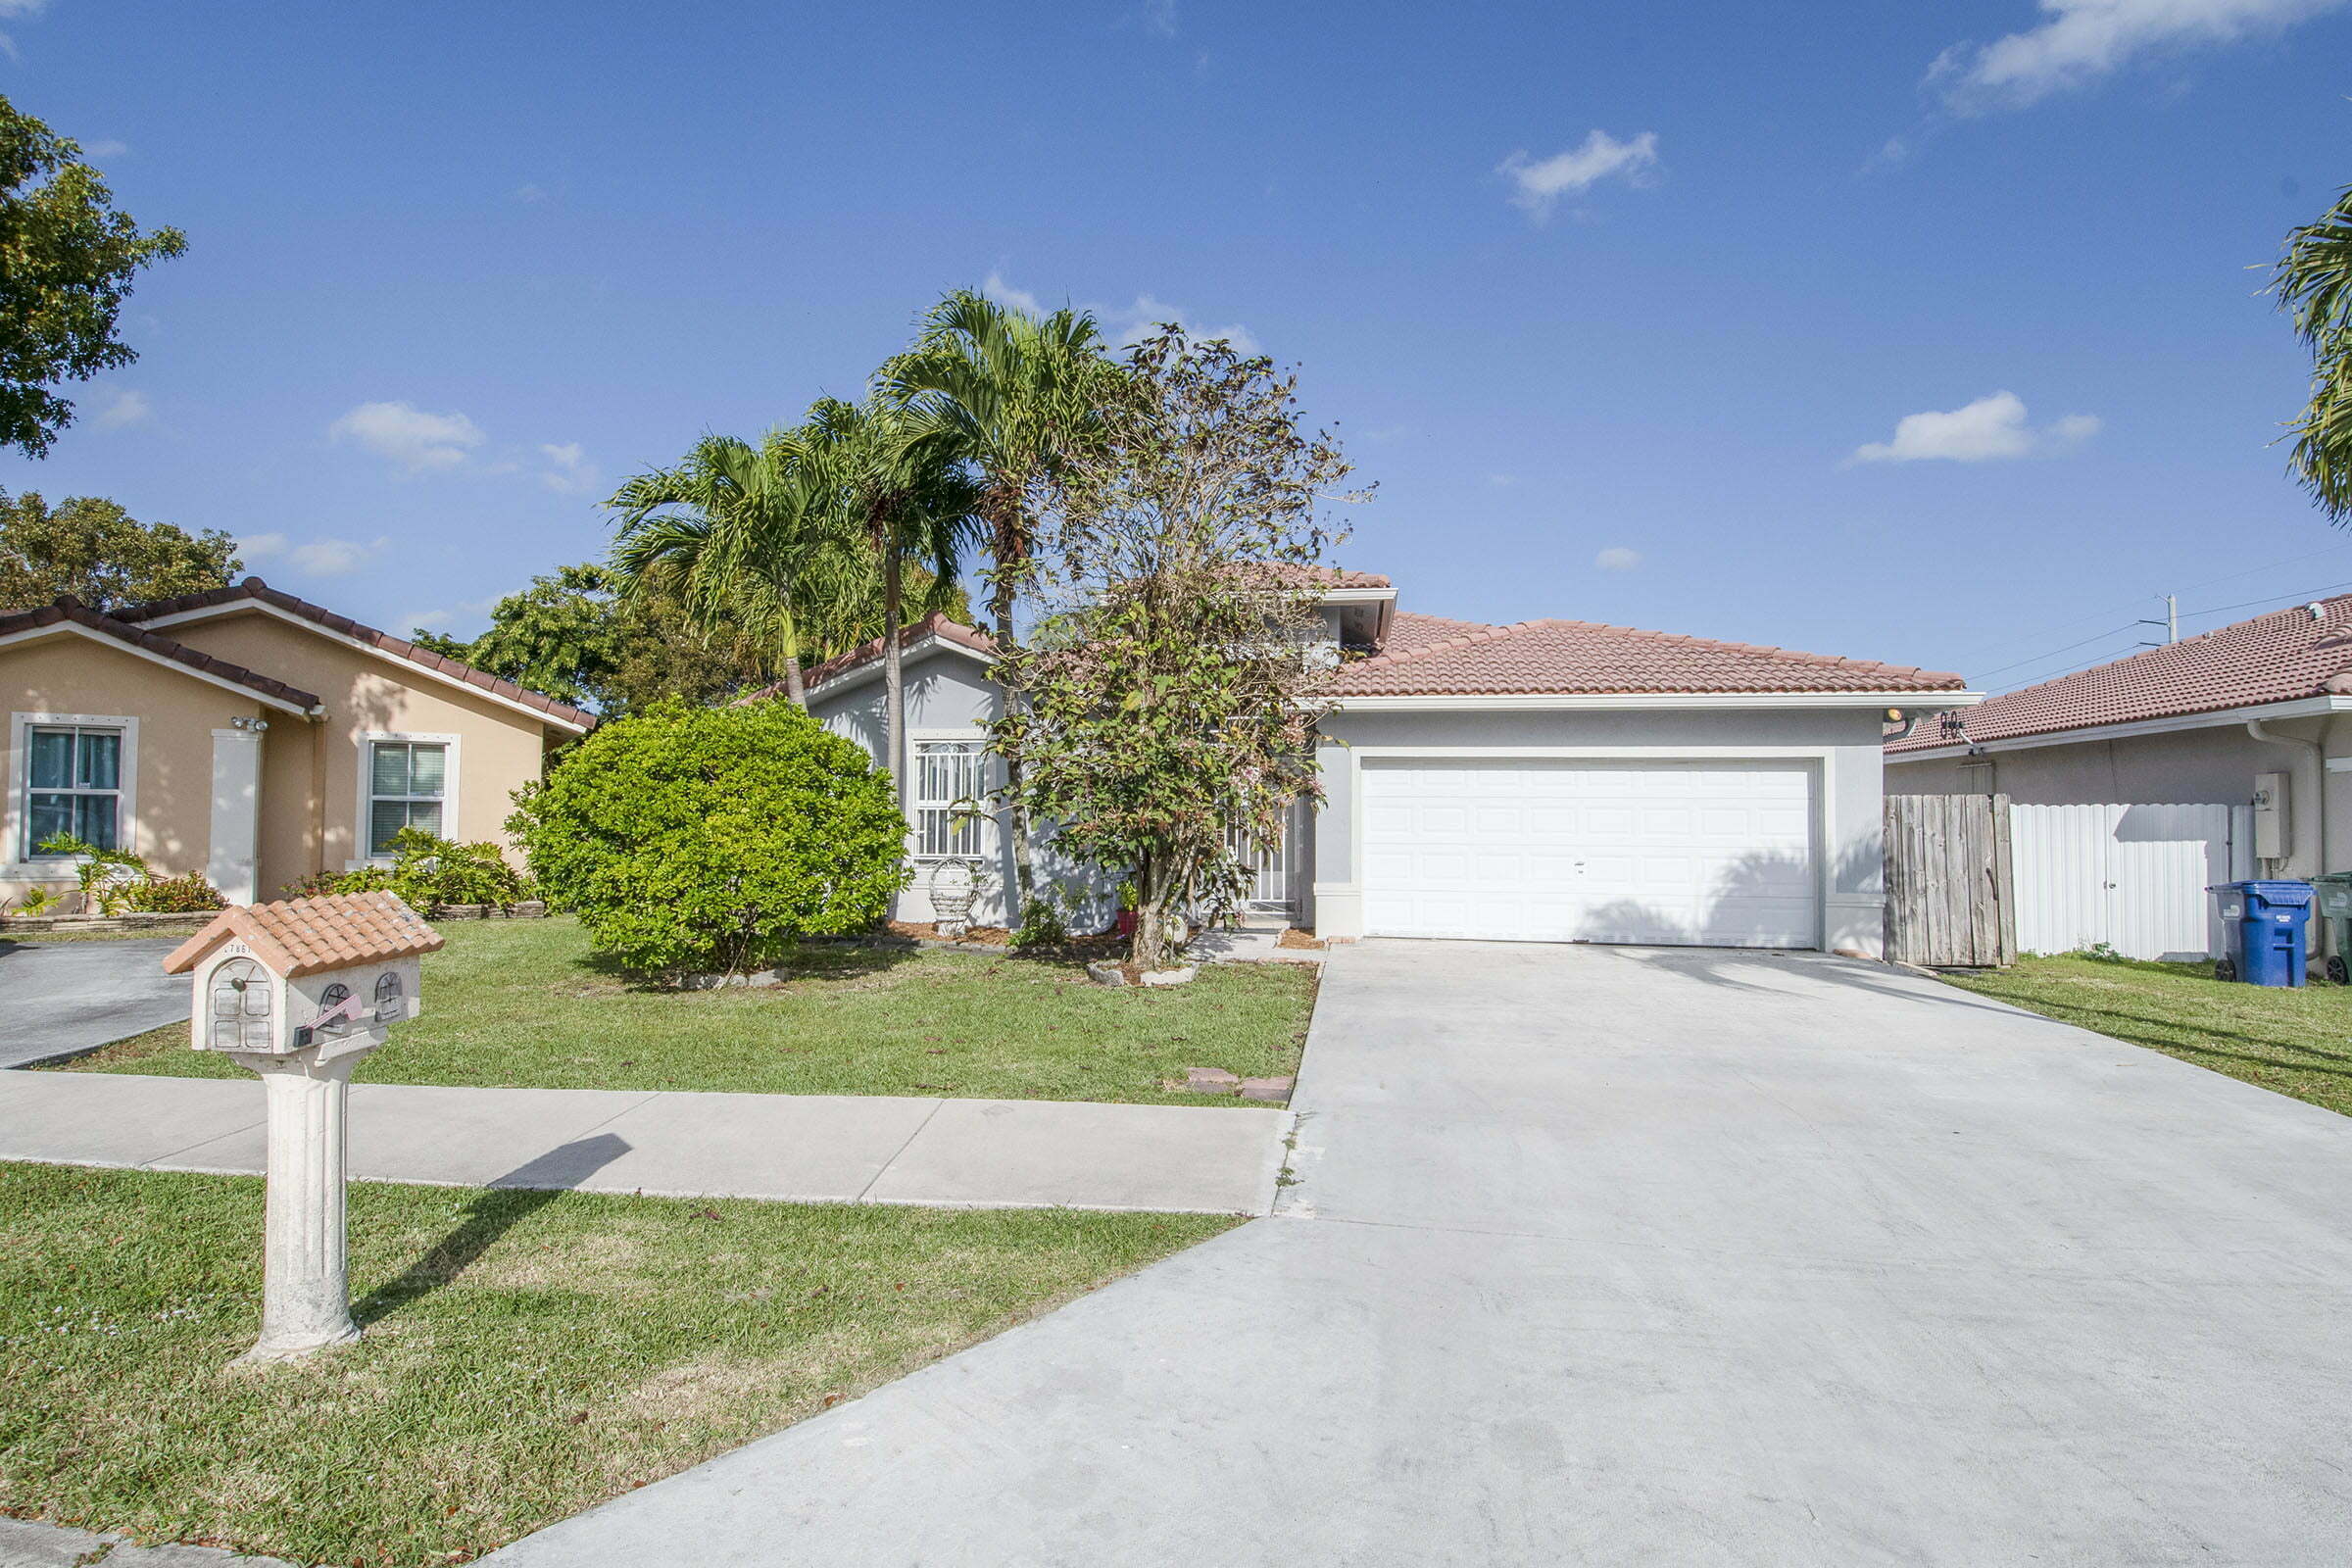 House Front (a) for 27861 SW 134th Place, Homestead, FL 33196 - © Flat Fee Florida Realty